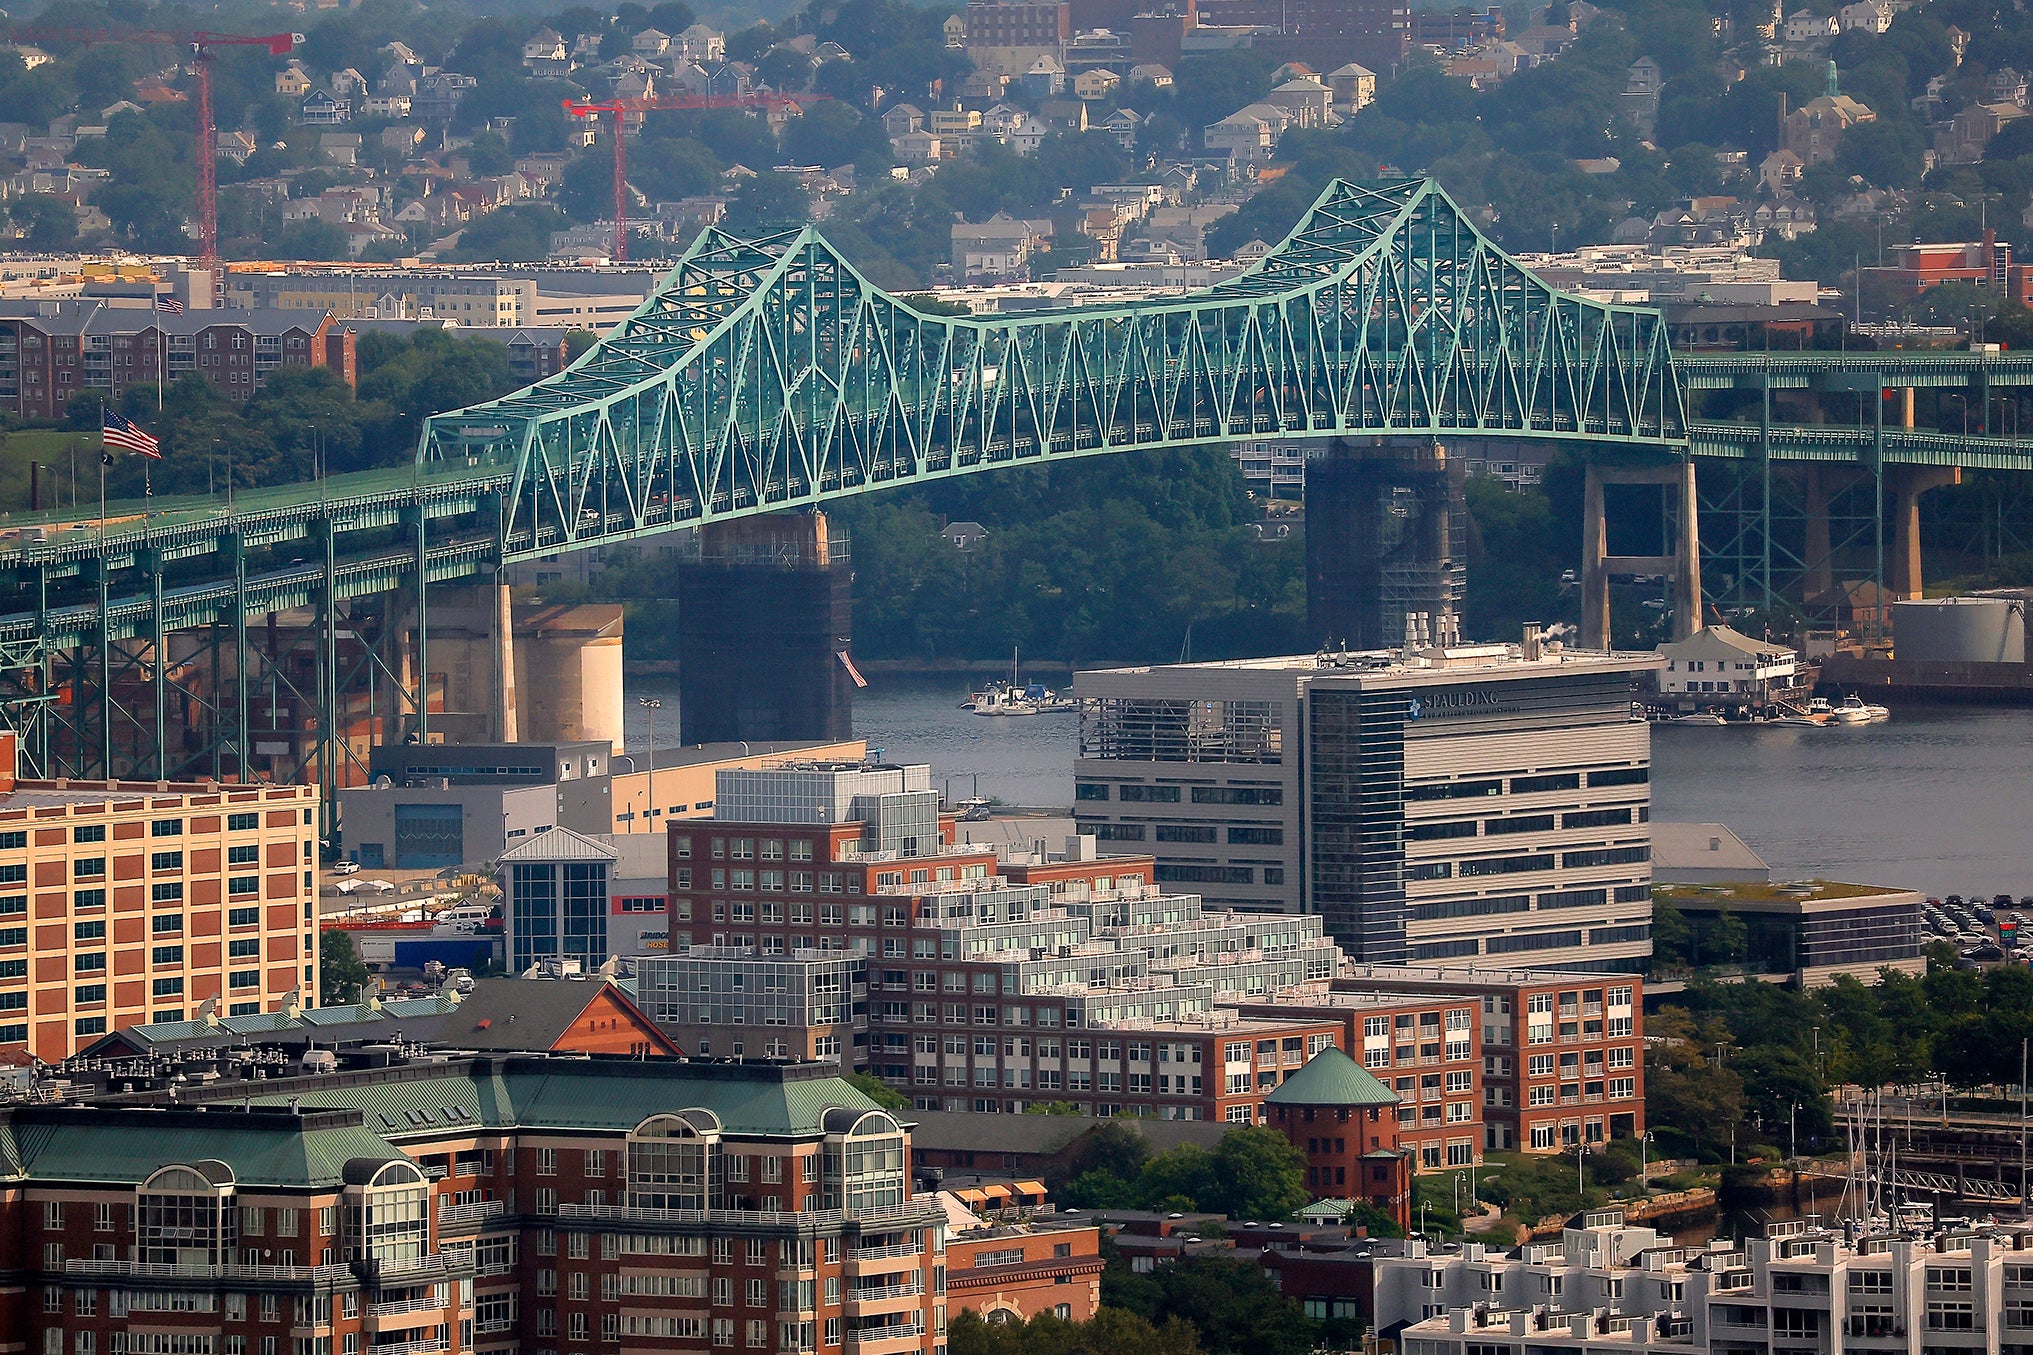 A picture of the green Tobin Bridge, which connects Chelsea to Charlestown across the Mystic River.